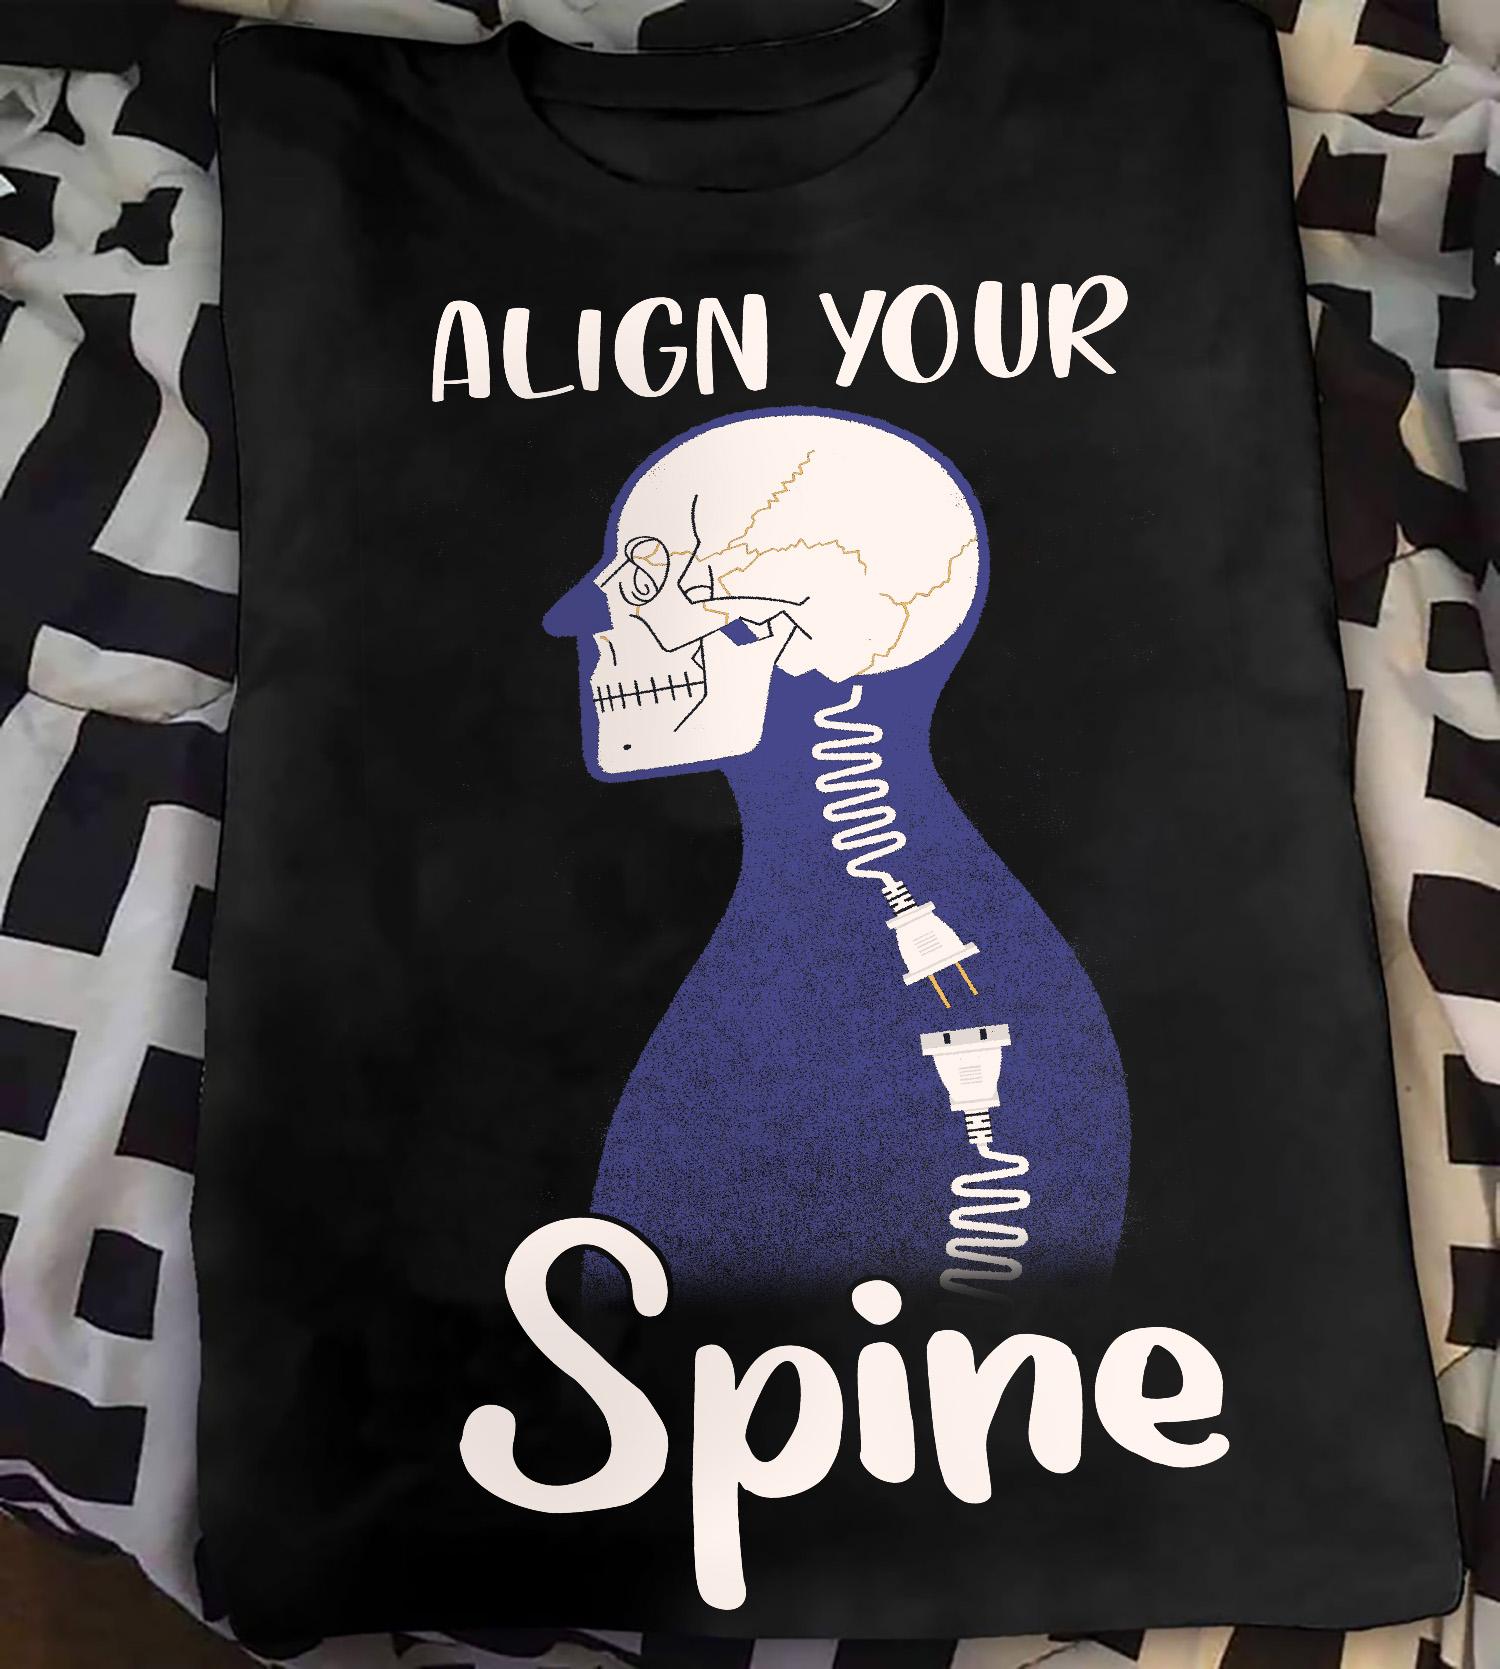 Spine Alignment - Align your spine